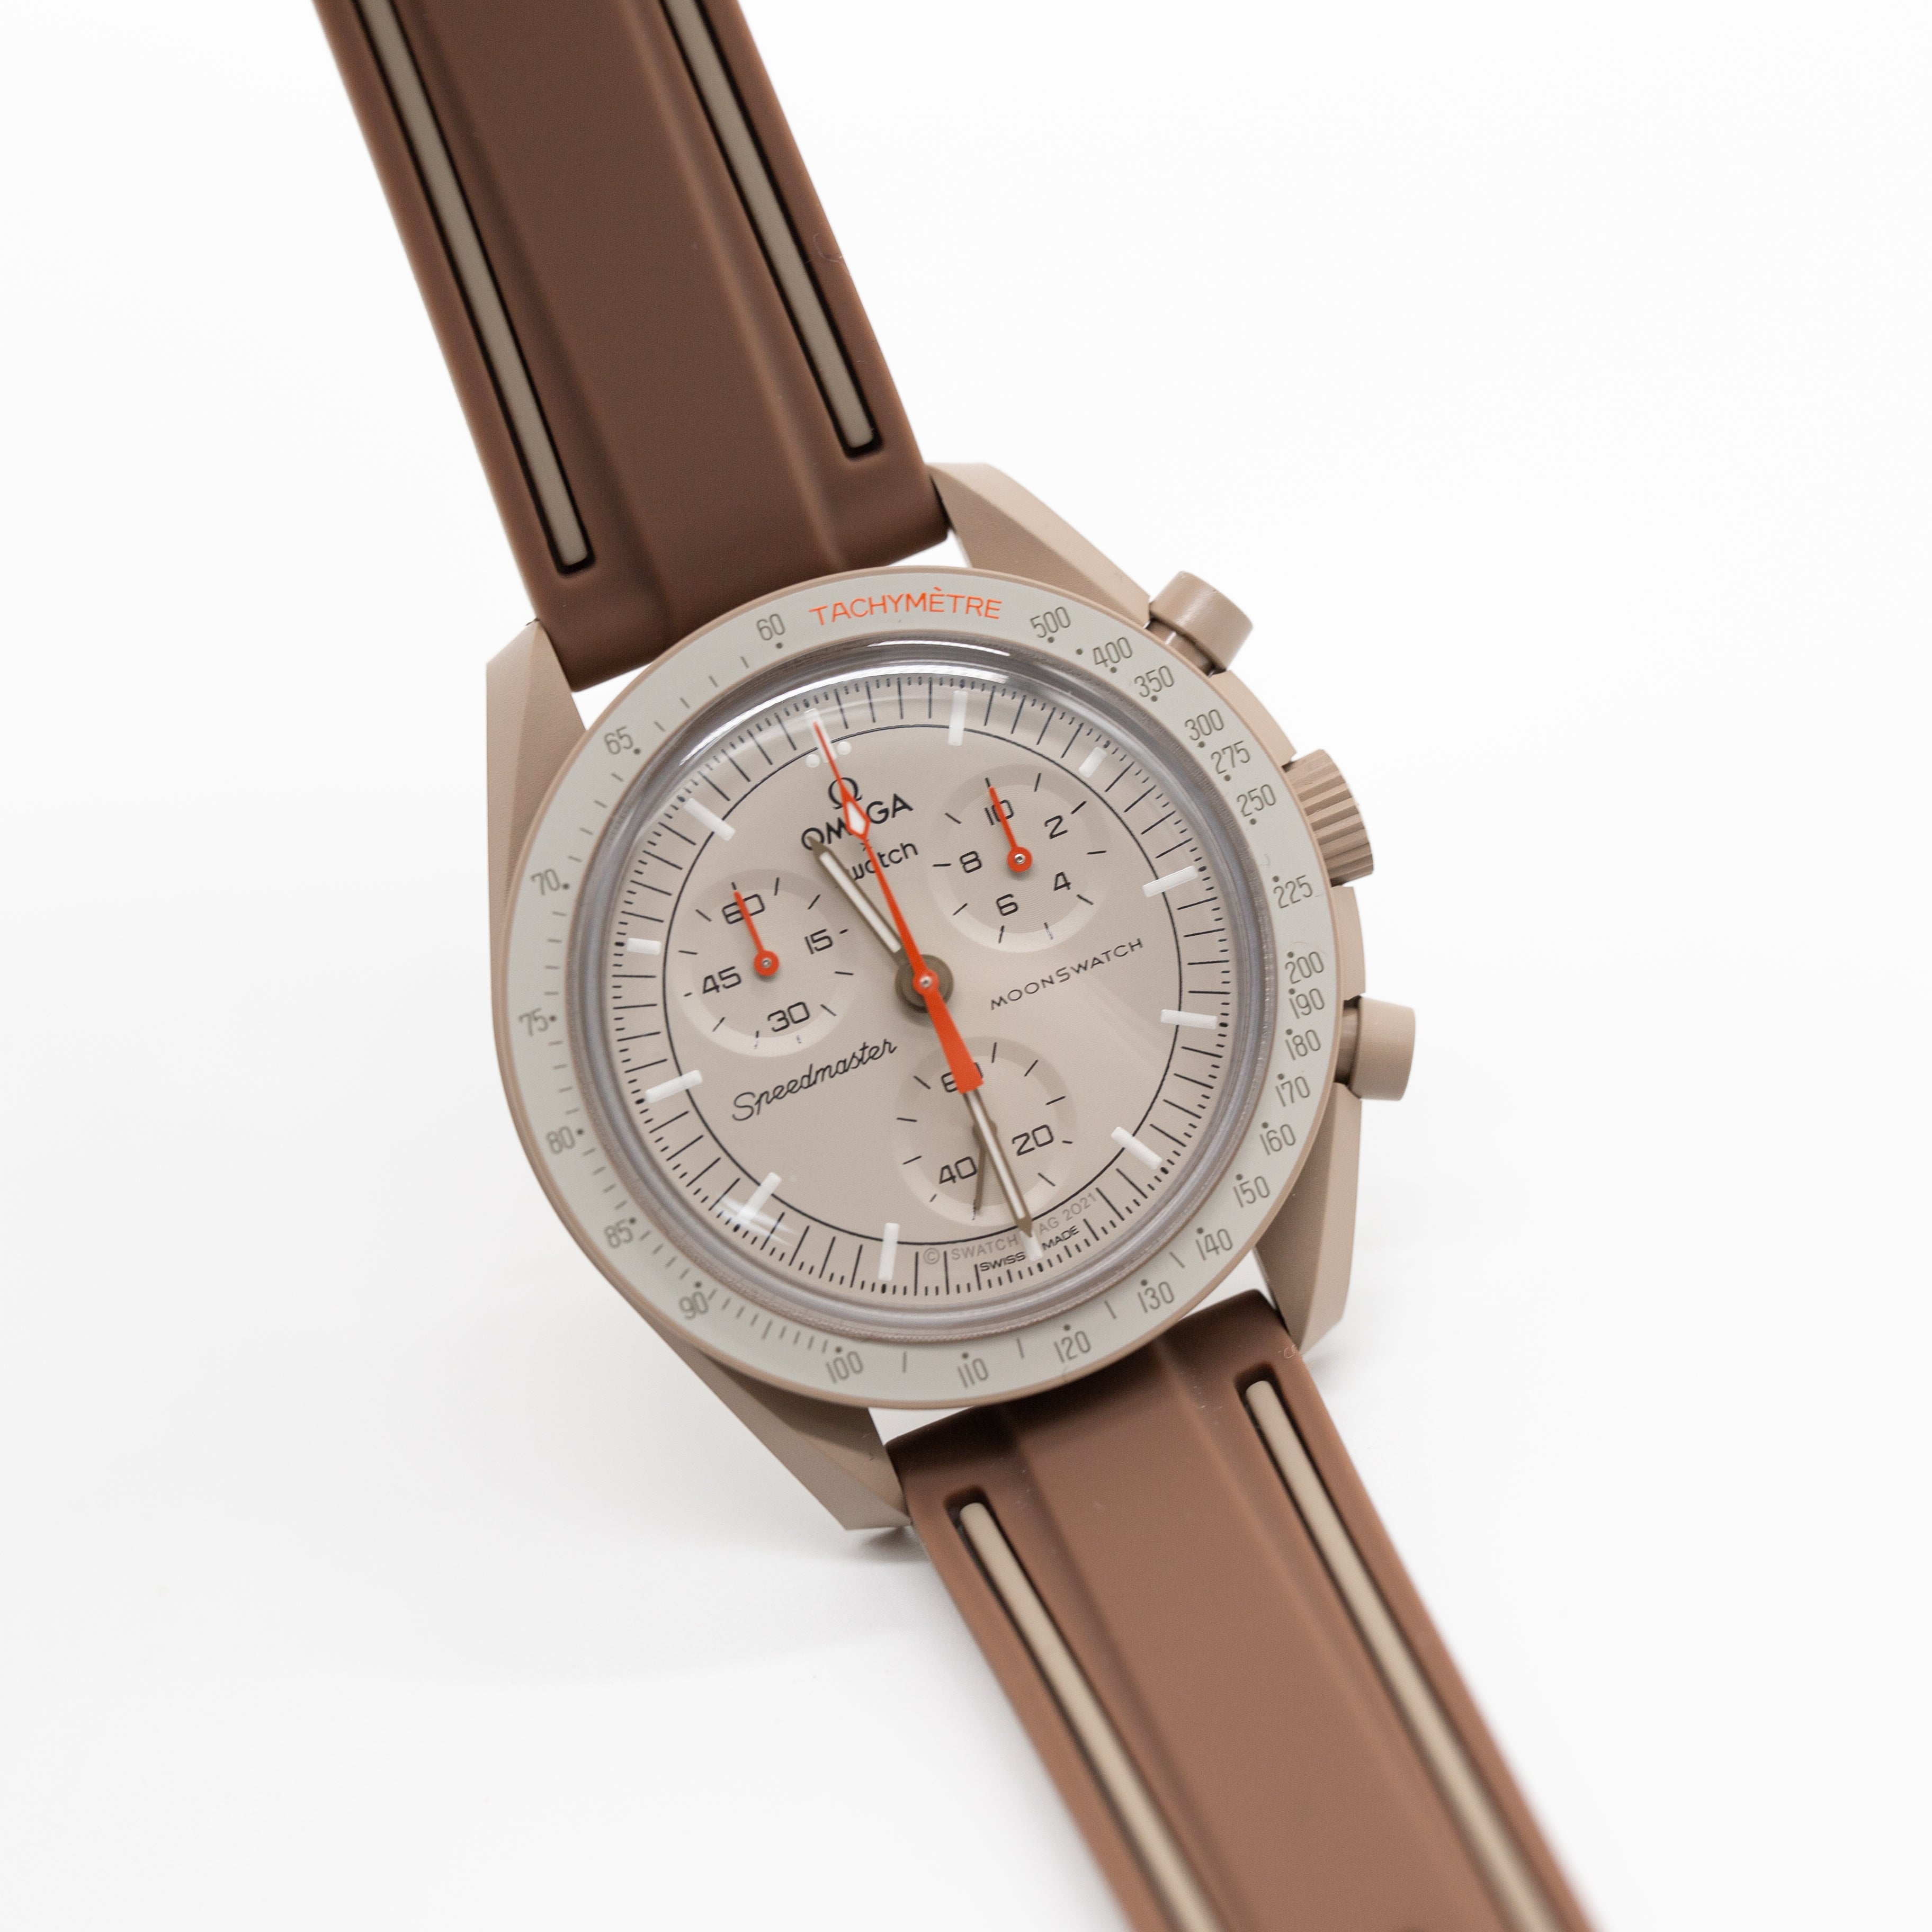 MoonSwatch Ouline Strap in Brown for Mission to Jupiter